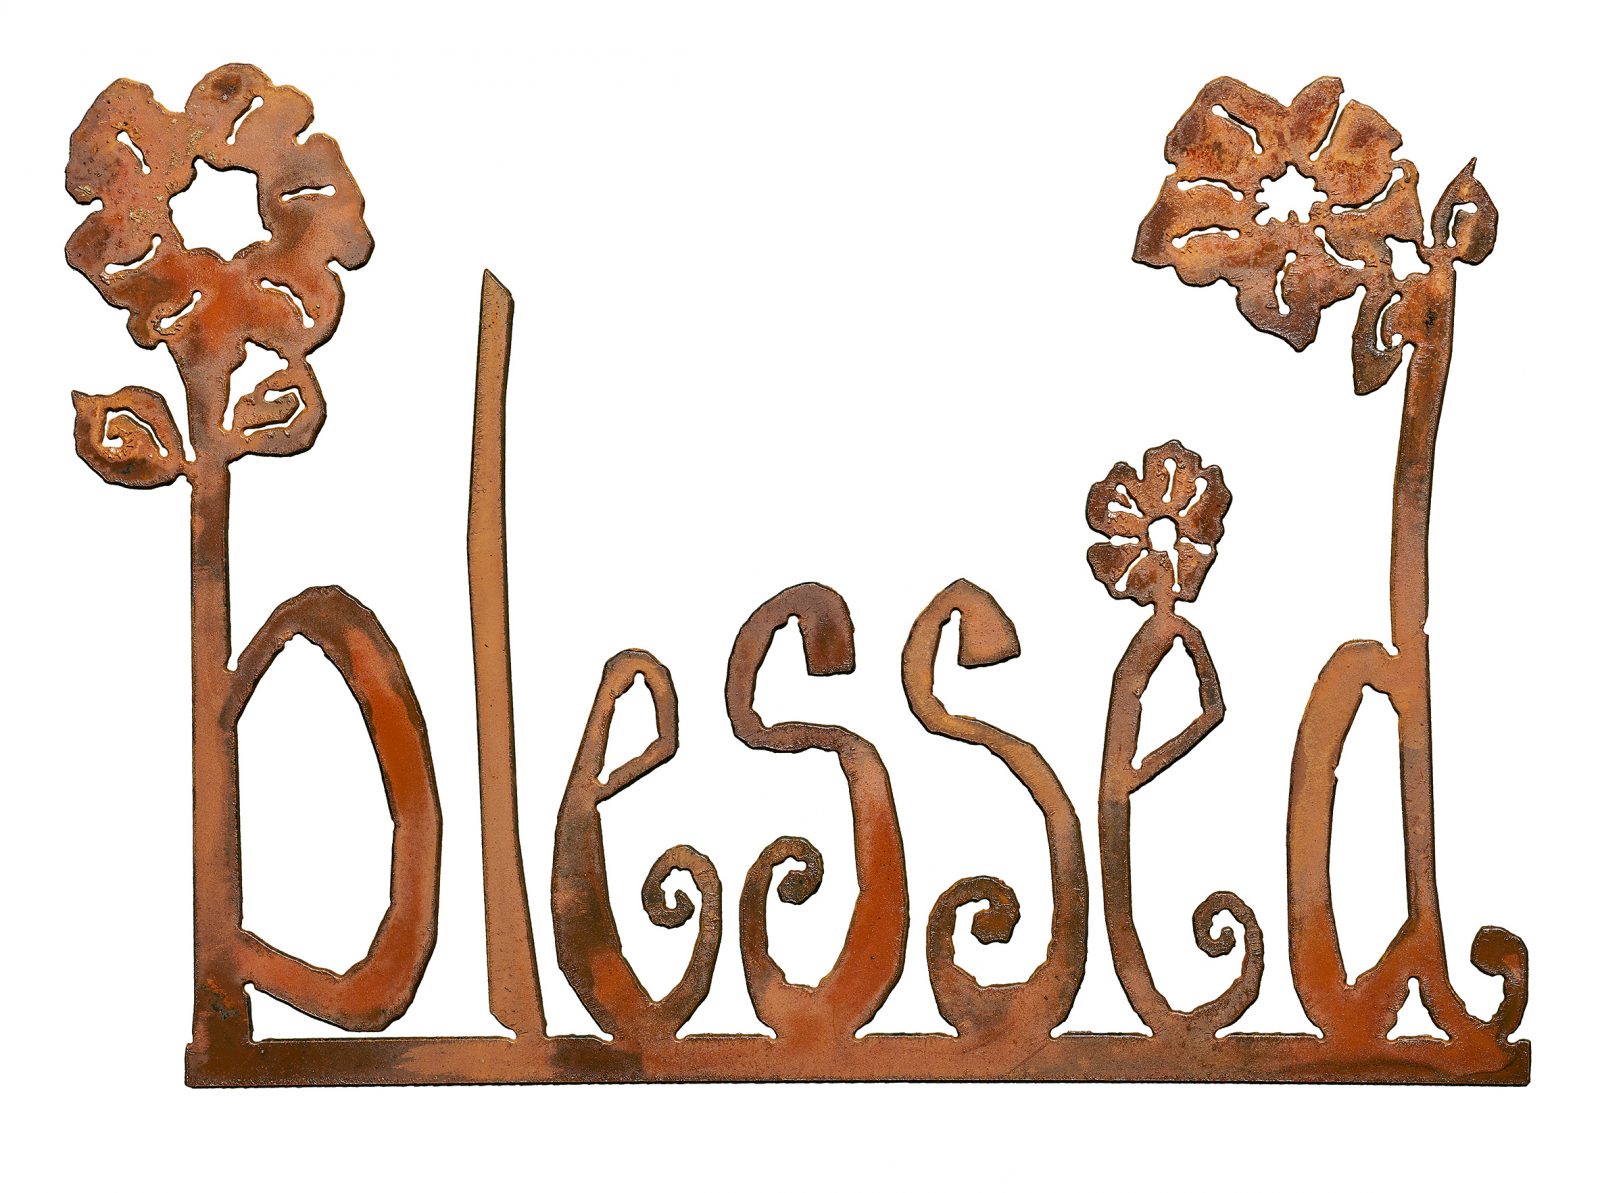 Metal "BLESSED" rusted sign by Elizabeth Keith Designs